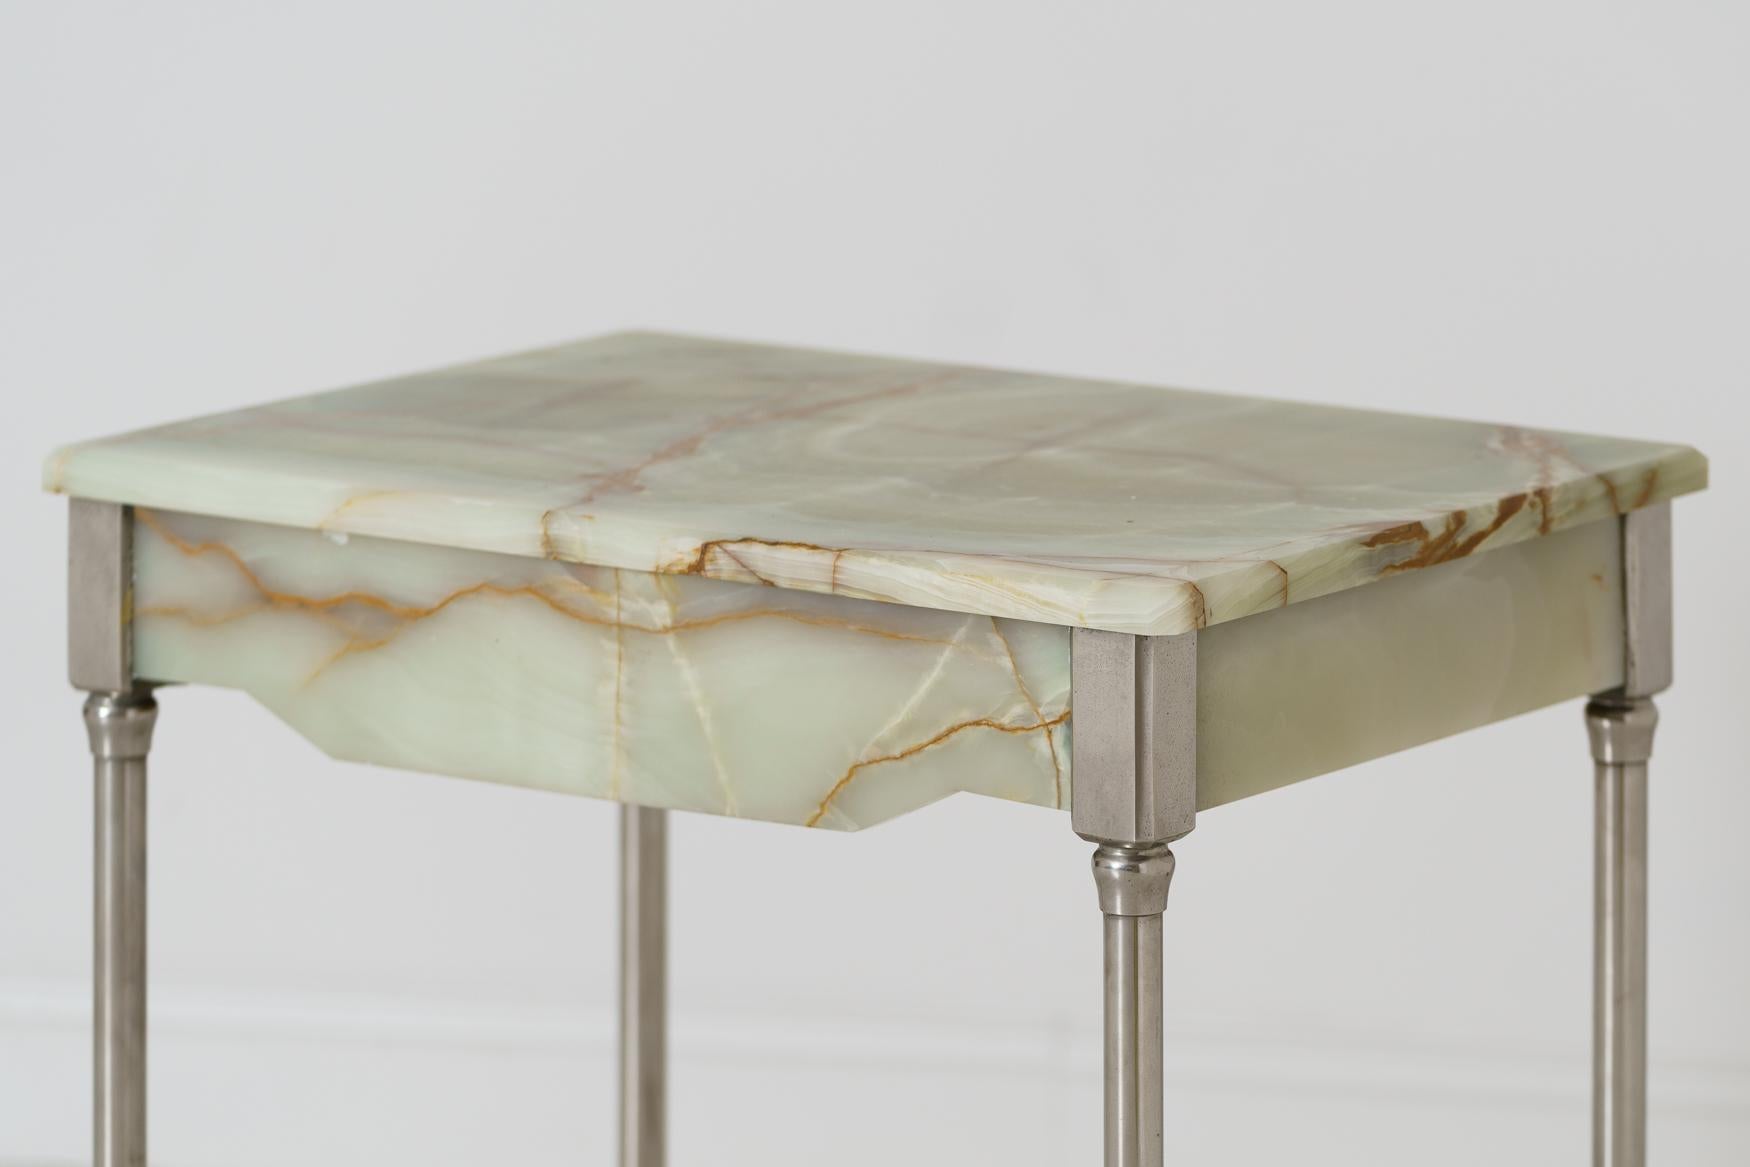 Plated Rare French Agate Patisserie Table